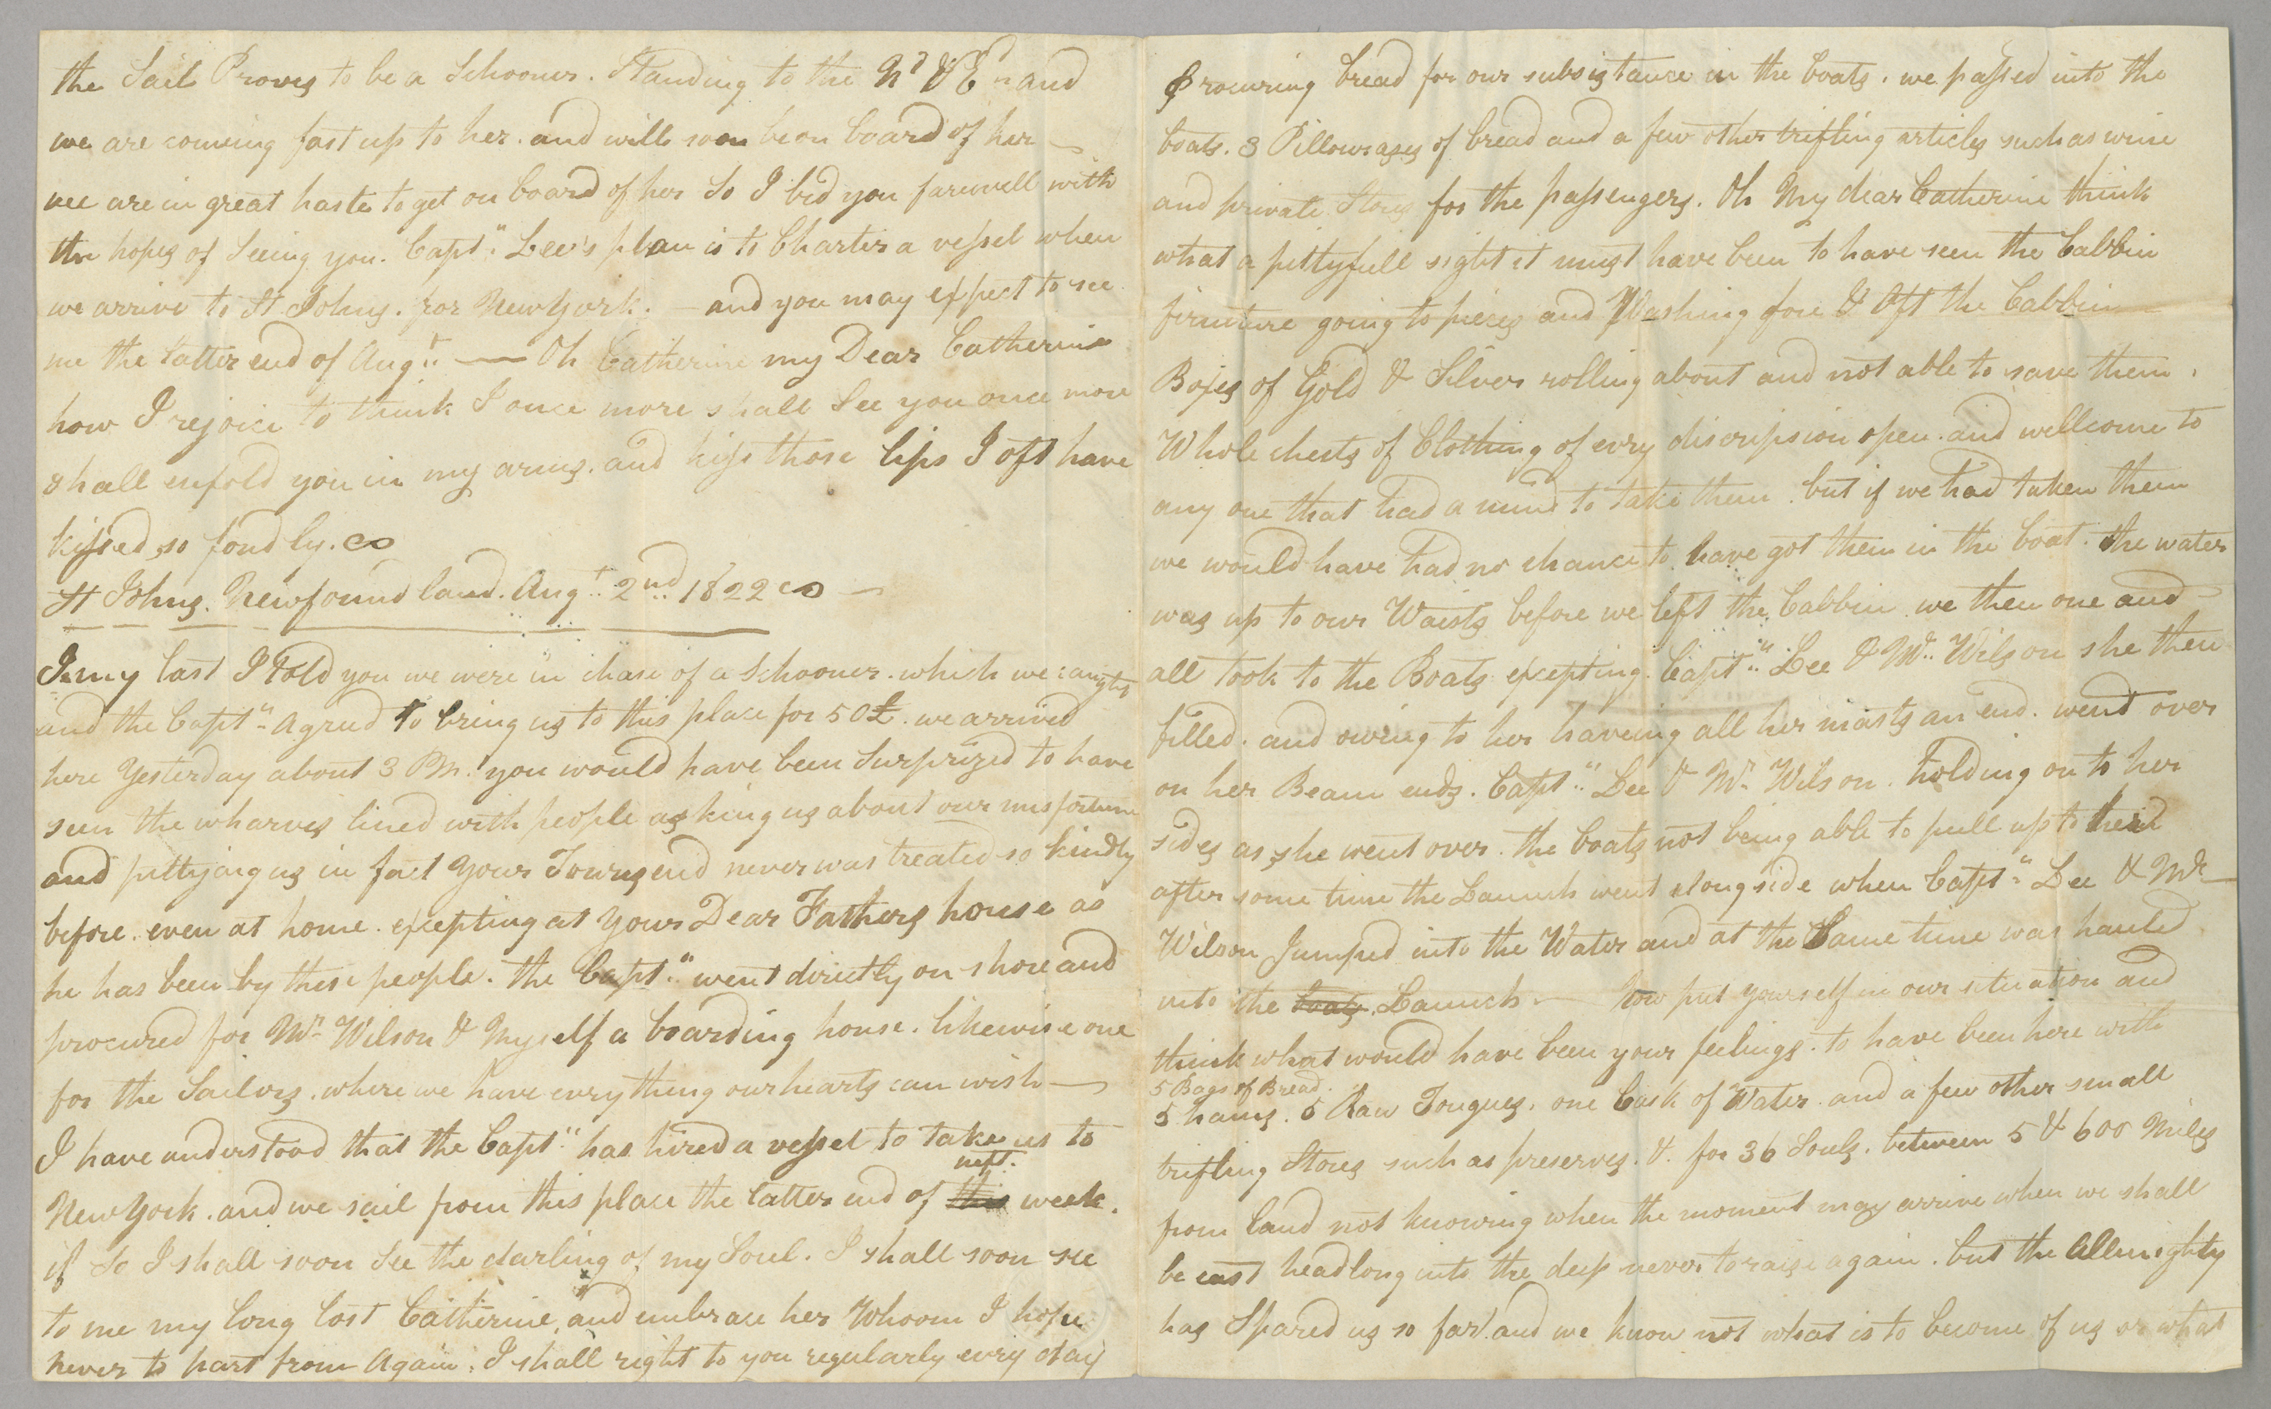 Letter, [Hewlett Townsend Coles], "Ship Liverpool's Boats towards St. Johns," to [Catherine Van Suydam Coles], n.p., Pages 2-3